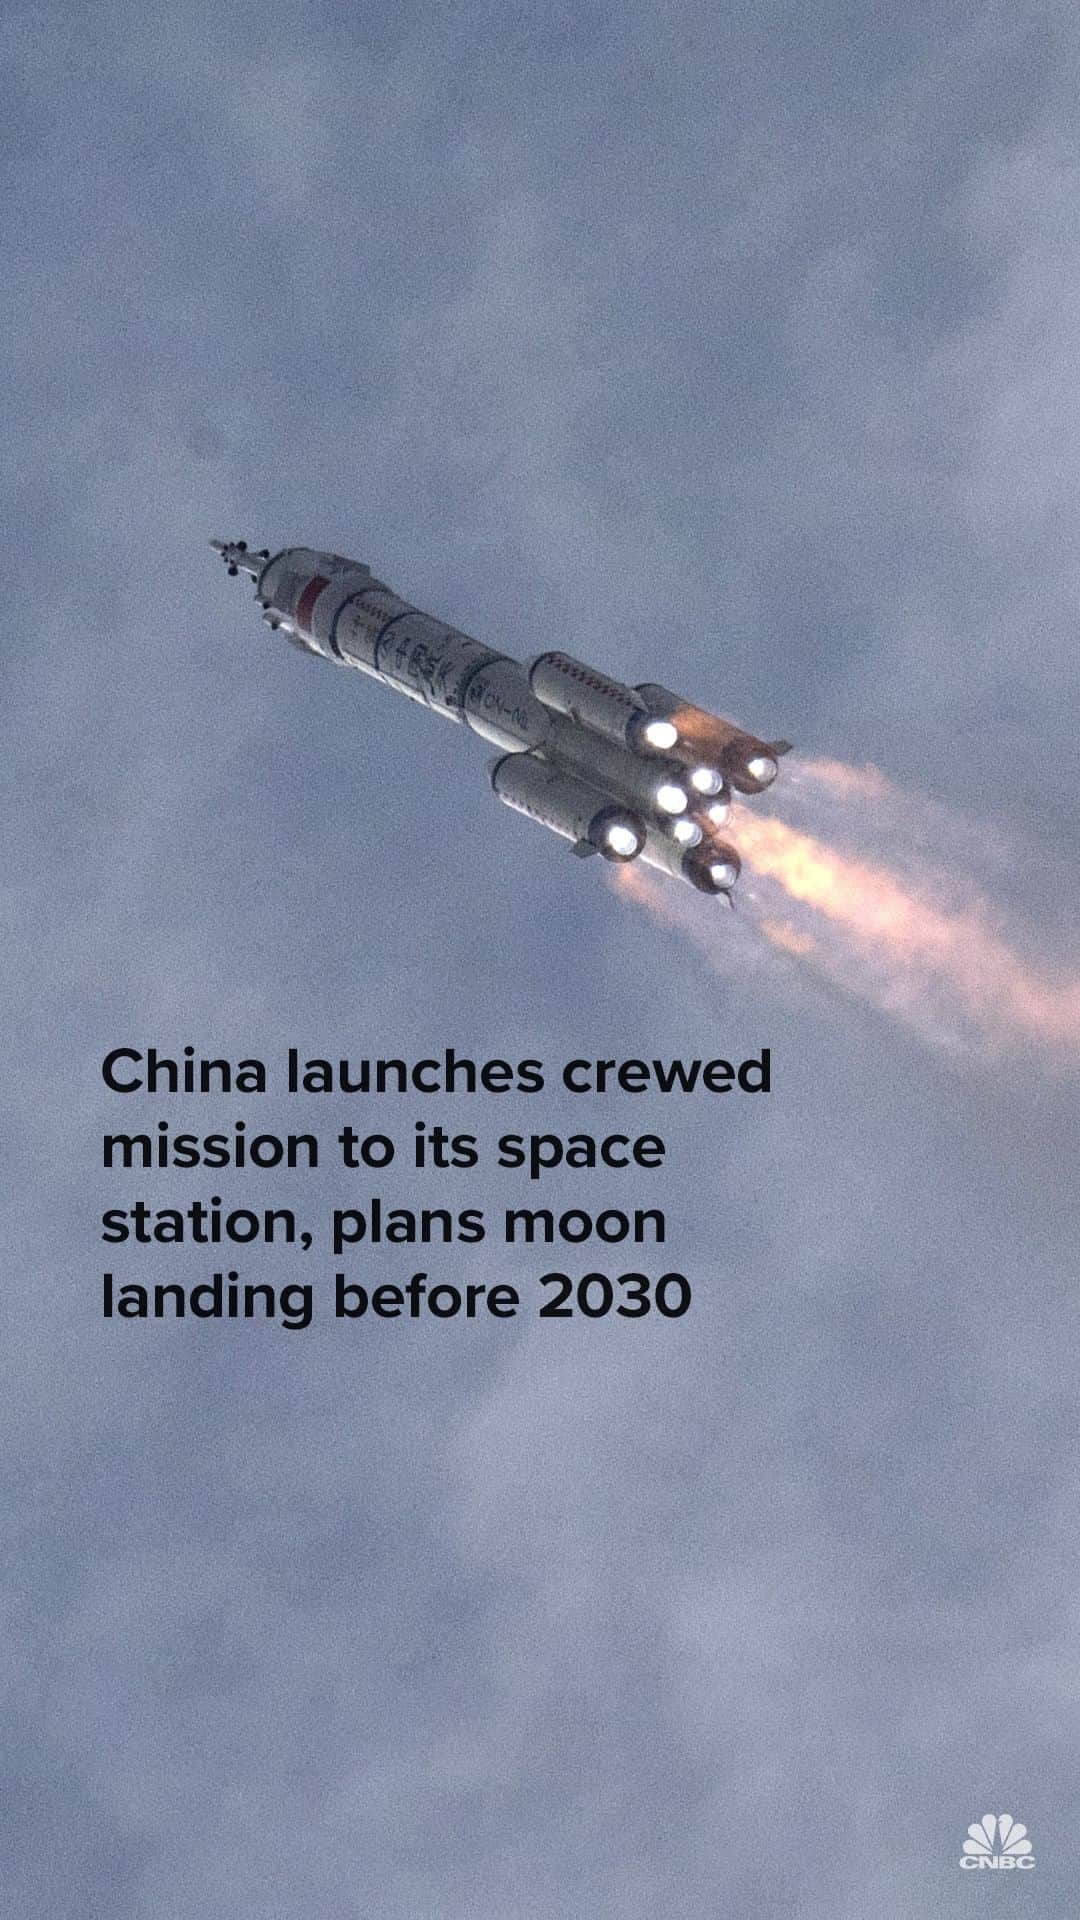 CNBCのインスタグラム：「China launched its Shenzhou-16 spacecraft crewed by three astronauts on Tuesday, the China Manned Space Agency said in a statement, declaring the launch a "complete success."  The spacecraft is heading to China's space station and will relieve the crew of Shenzhou-15, who have been living there since November.  In recent years, China has ramped up its efforts in space exploration and research. A CMSA official said China aims to launch a crewed mission to the moon by 2030, according to state media.  Full details on the launch at the link in bio.」